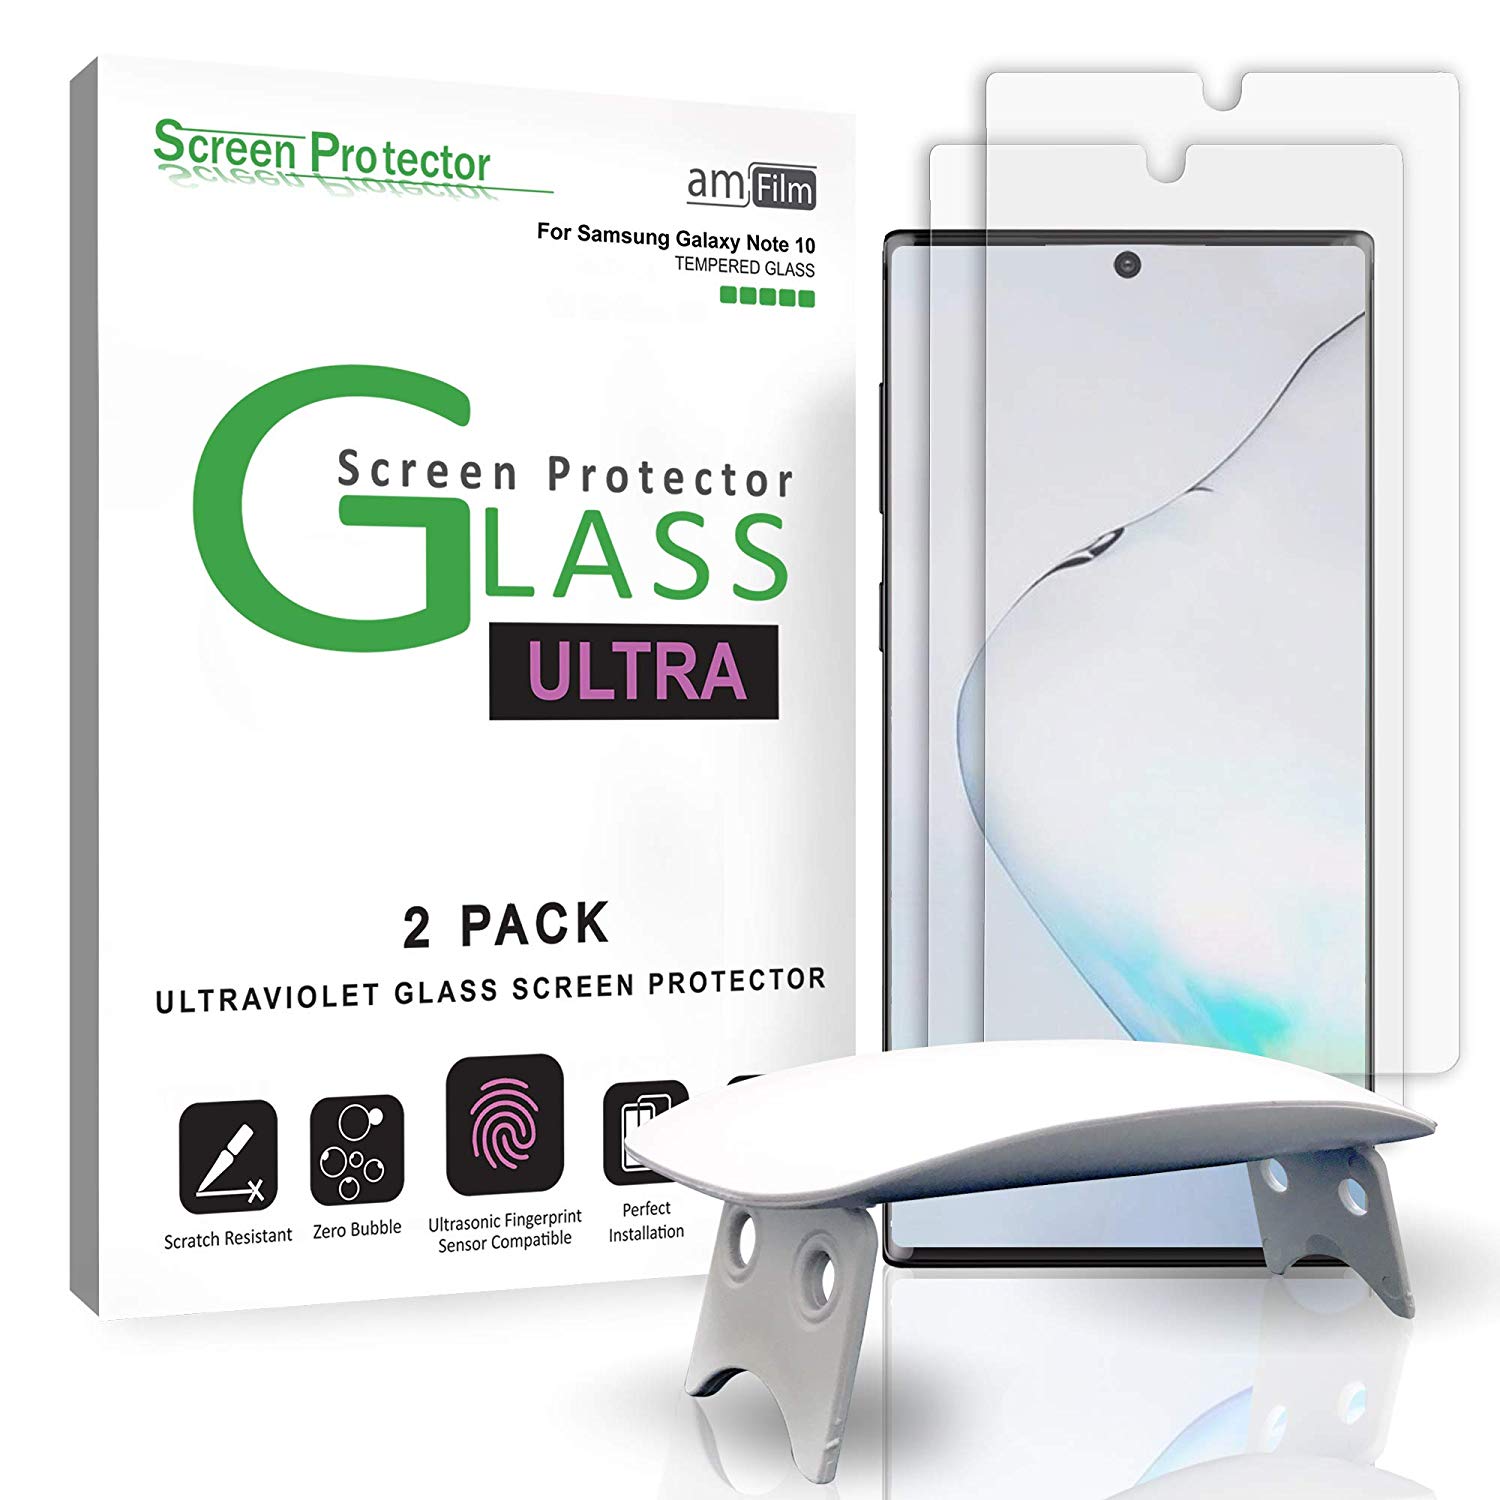 HD TransparentTempered Glass For Samsung Galaxy Note 10 6.3” Screen Protector 9H Hardness 2+2Pack Scratch Resistance Fingerprint Unlock Support Galaxy Note 10 Screen Protector 3D Curved Surface 